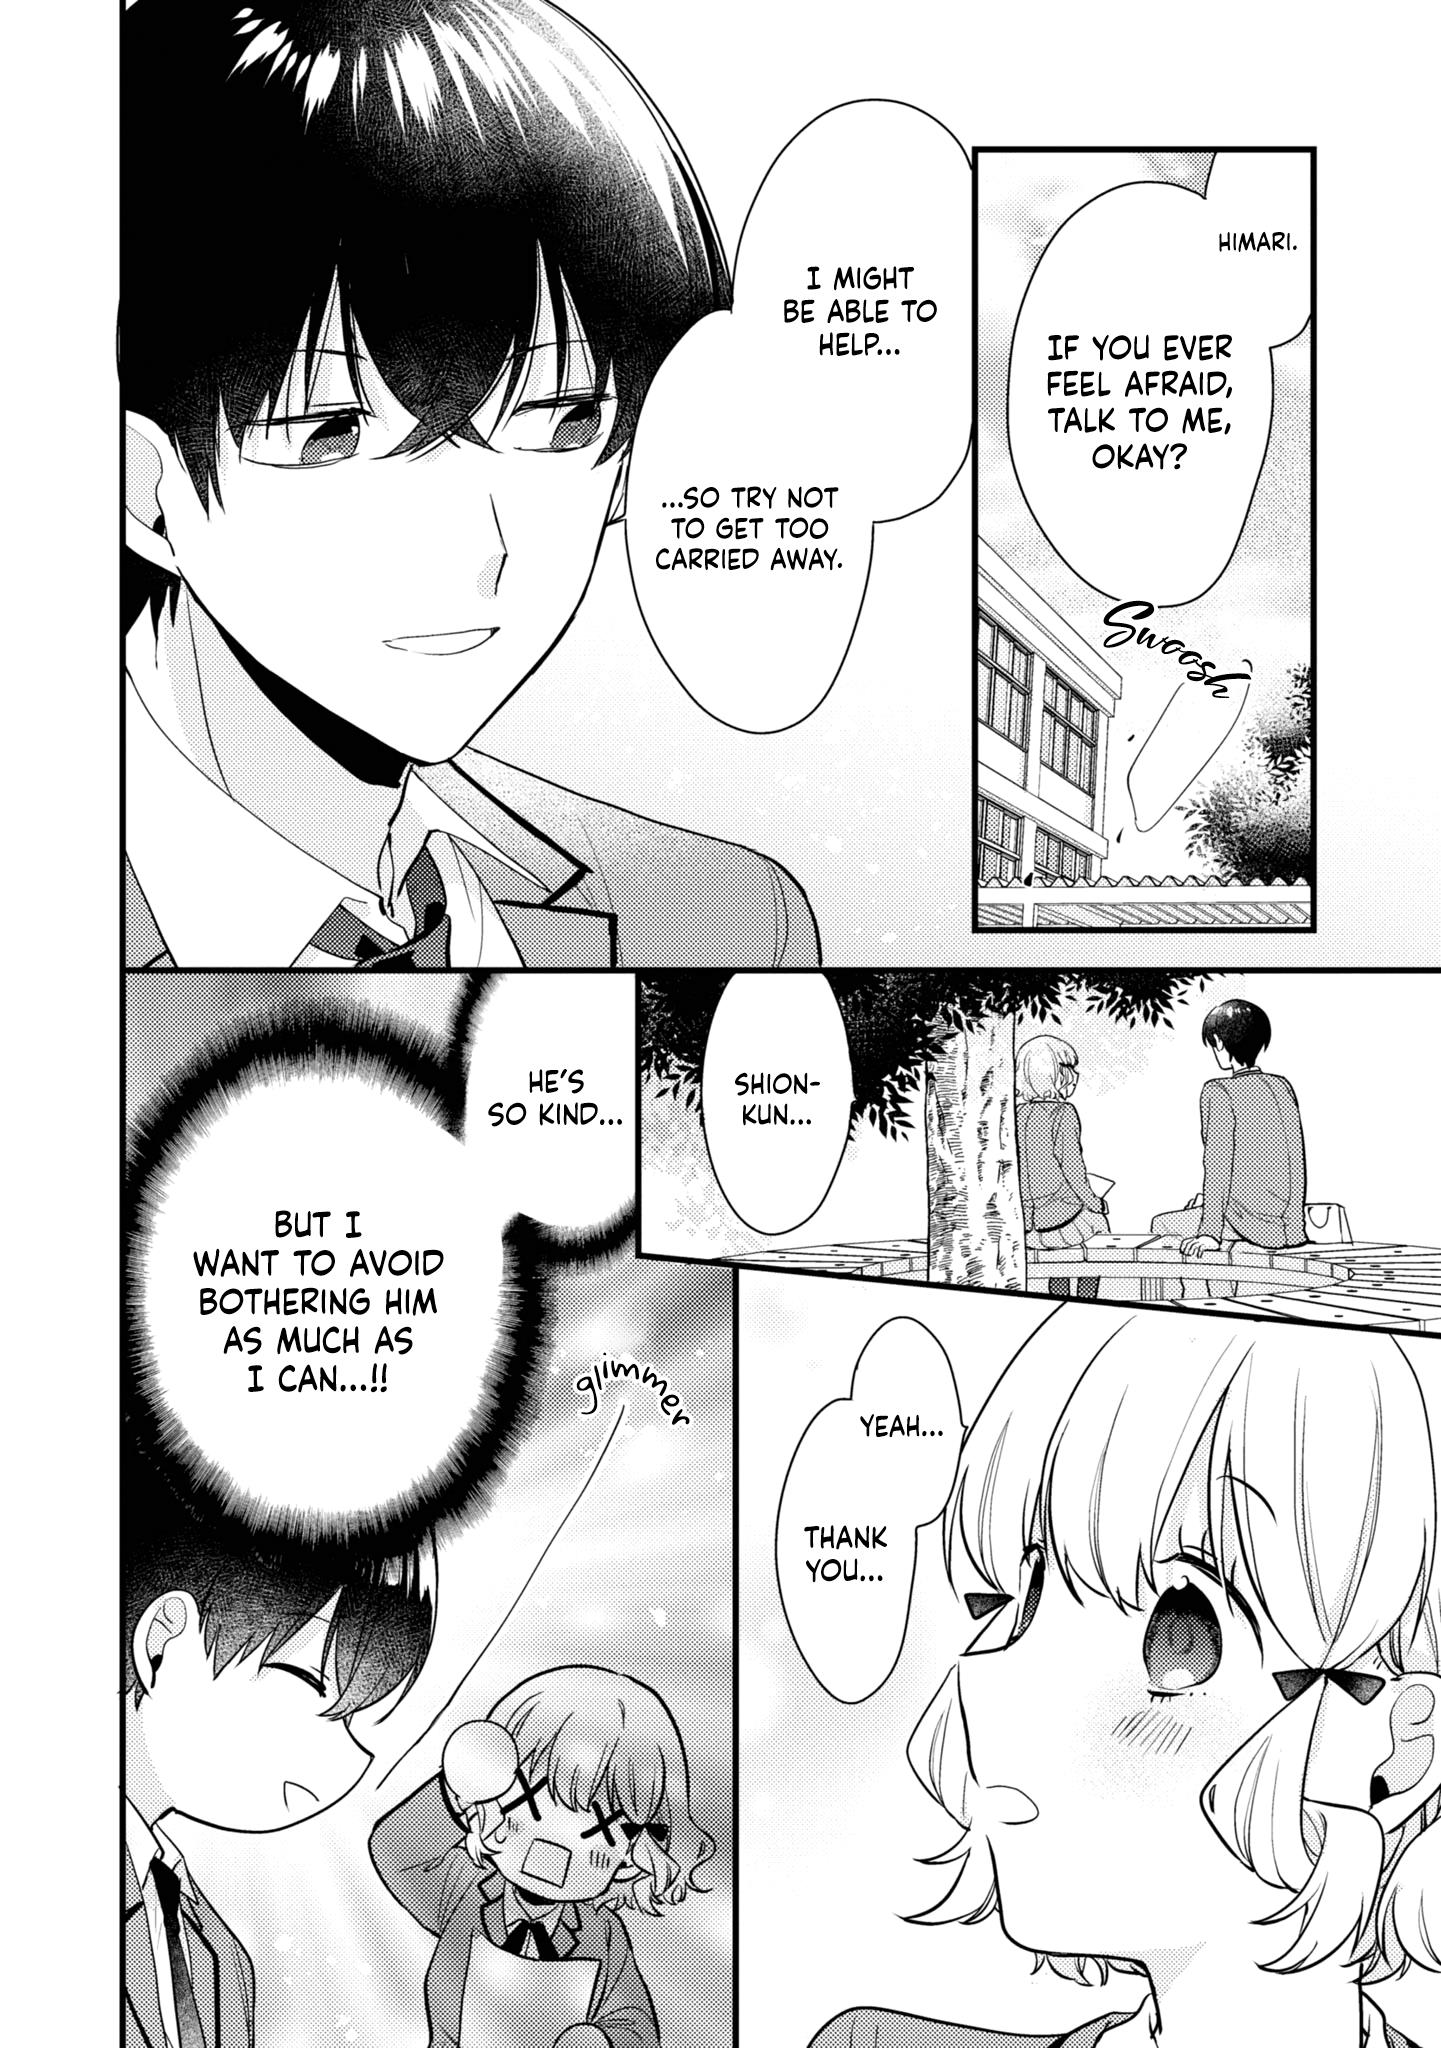 I Have A Second Chance At Life, So I’Ll Pamper My Yandere Boyfriend For A Happy Ending!! Chapter 5 #9